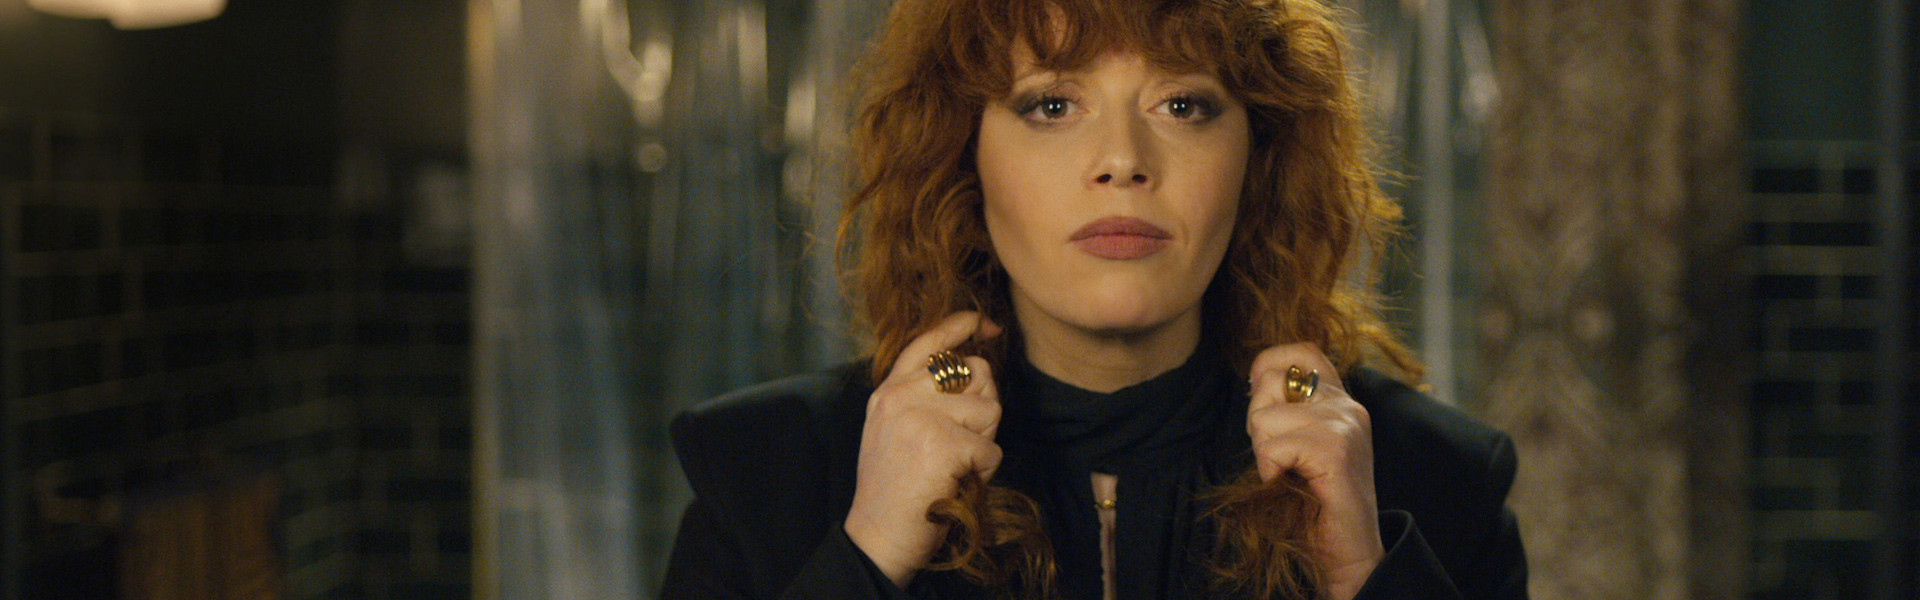 Header image for article DP Chris Teague Shoots Netflix's Russian Doll on RED Cameras